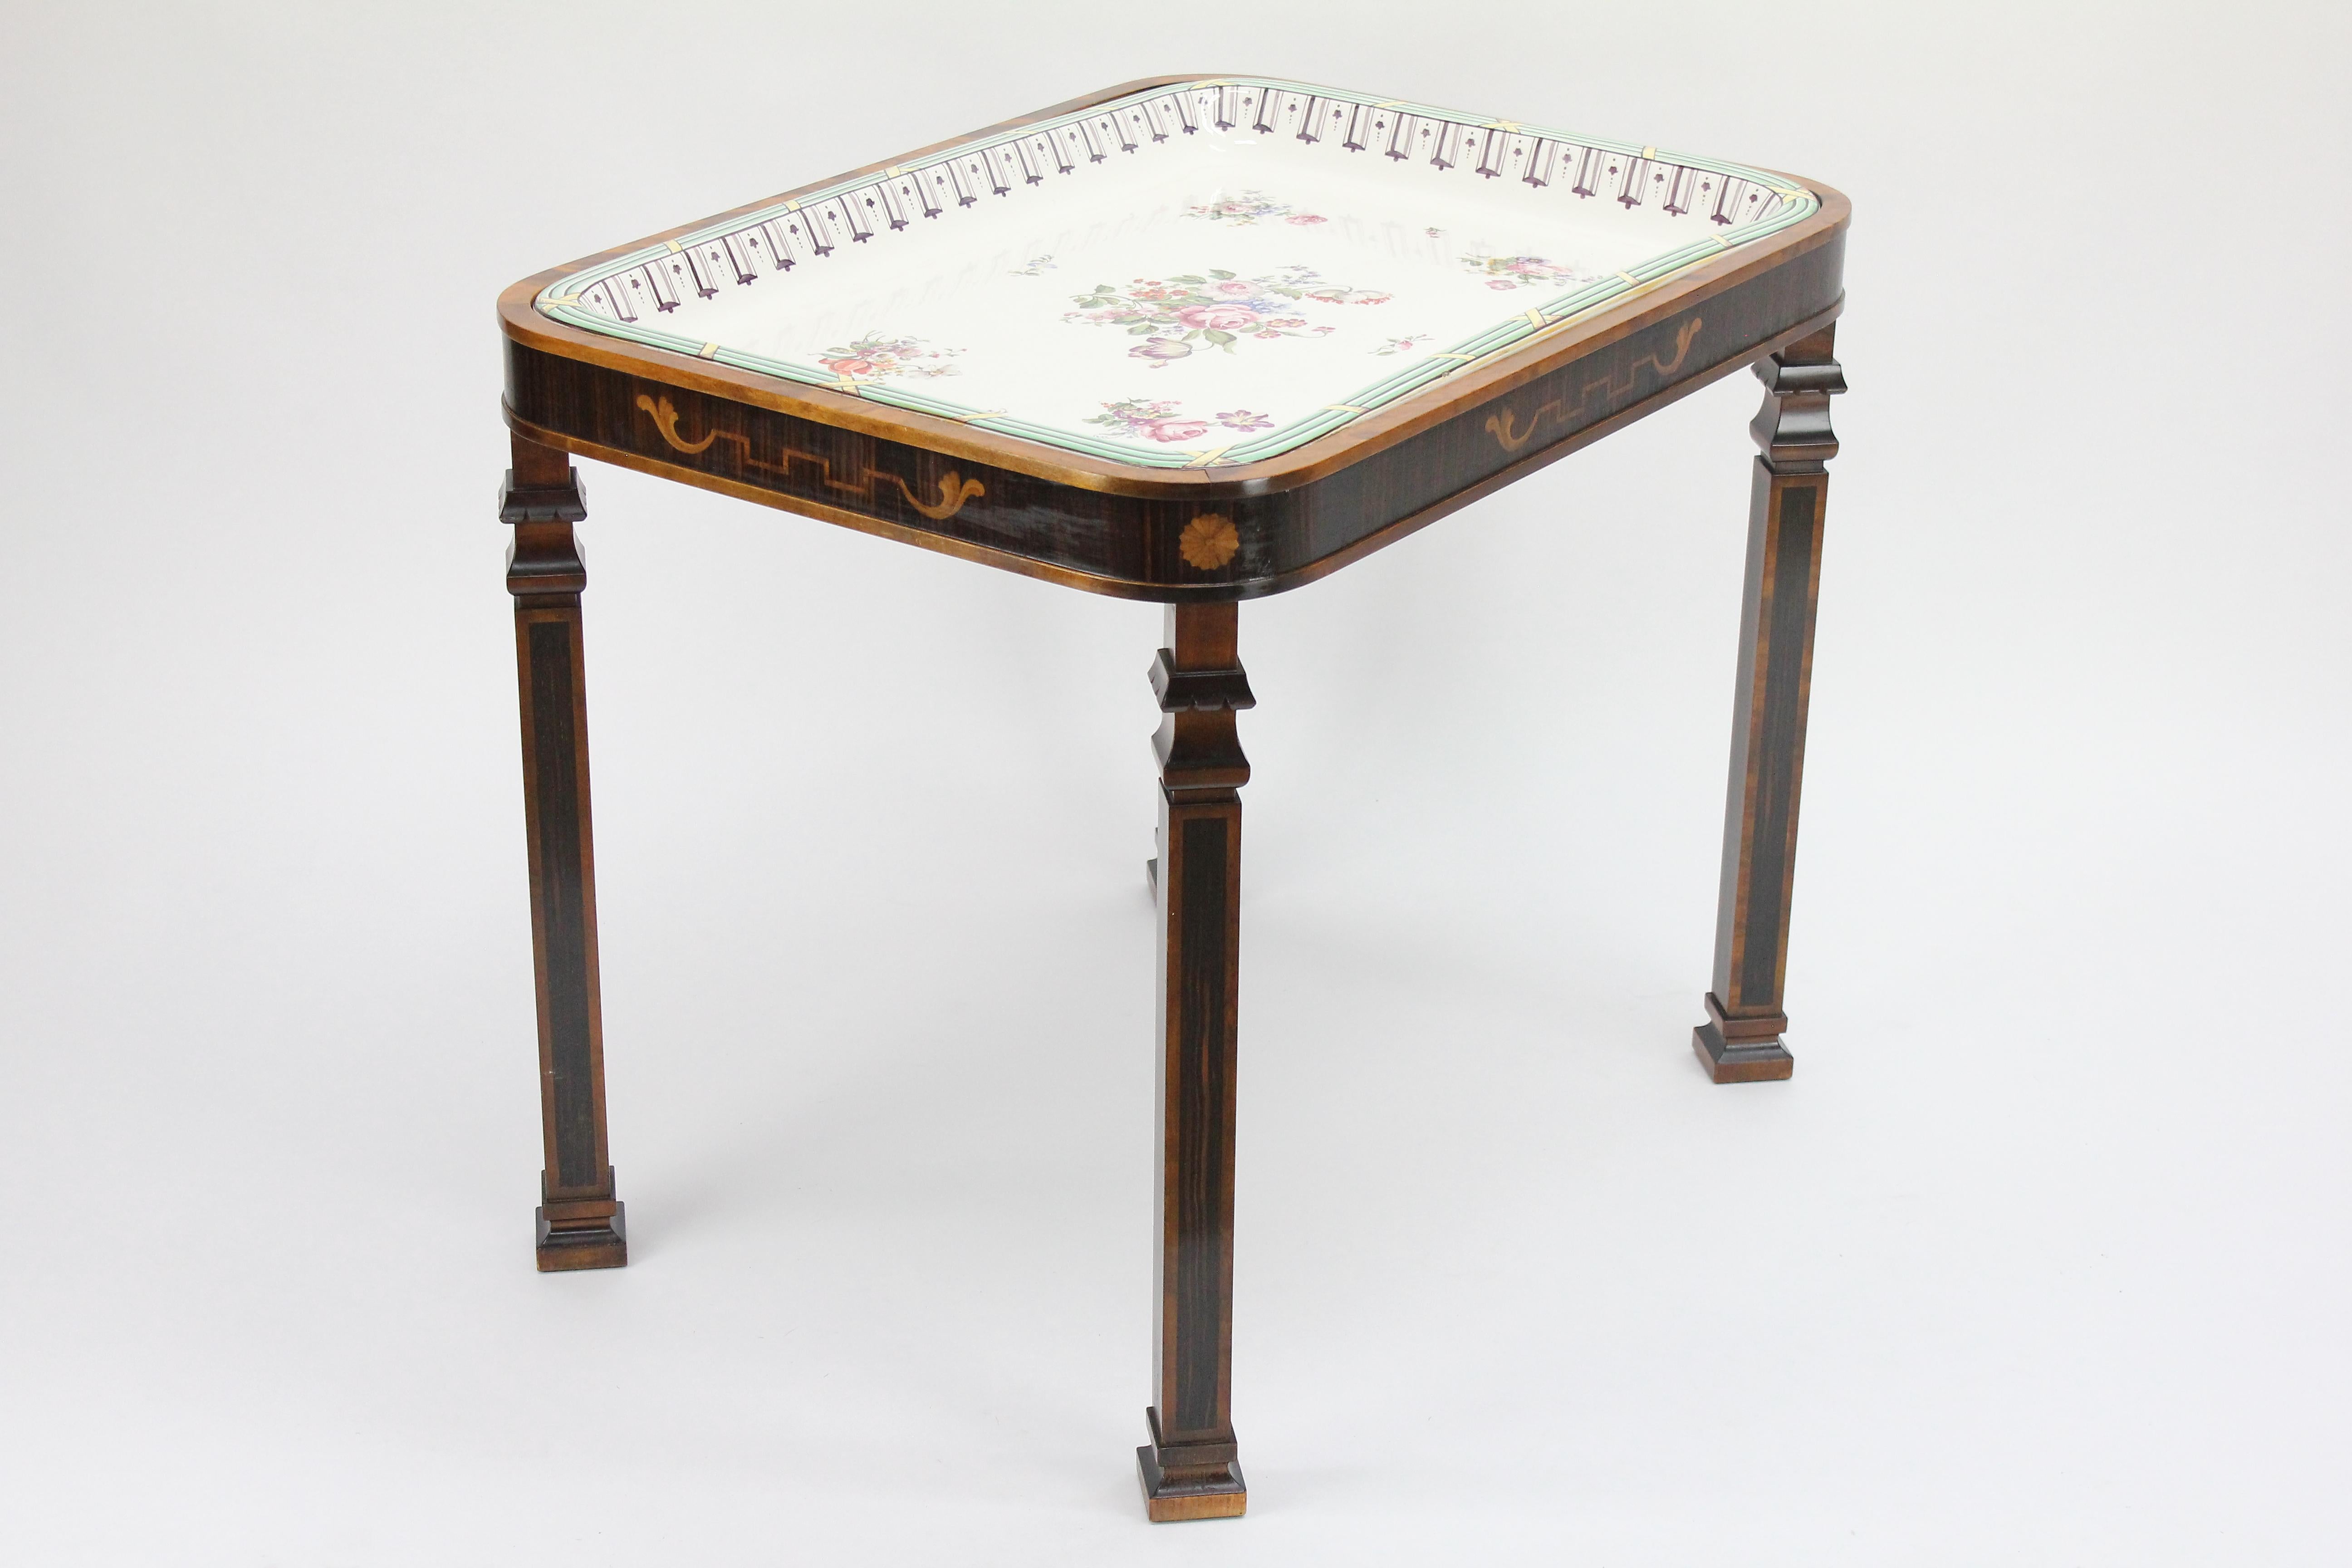 Vey unusual Swedish Grace tray table. Most likely Carl Malmsten for Bodafors, 1920s.
The hand-painted faience tray is made by Karl Lindström (1865-1936) for Rörstrand, Stockholm Sweden.
Signed with Rörstrands crowned 